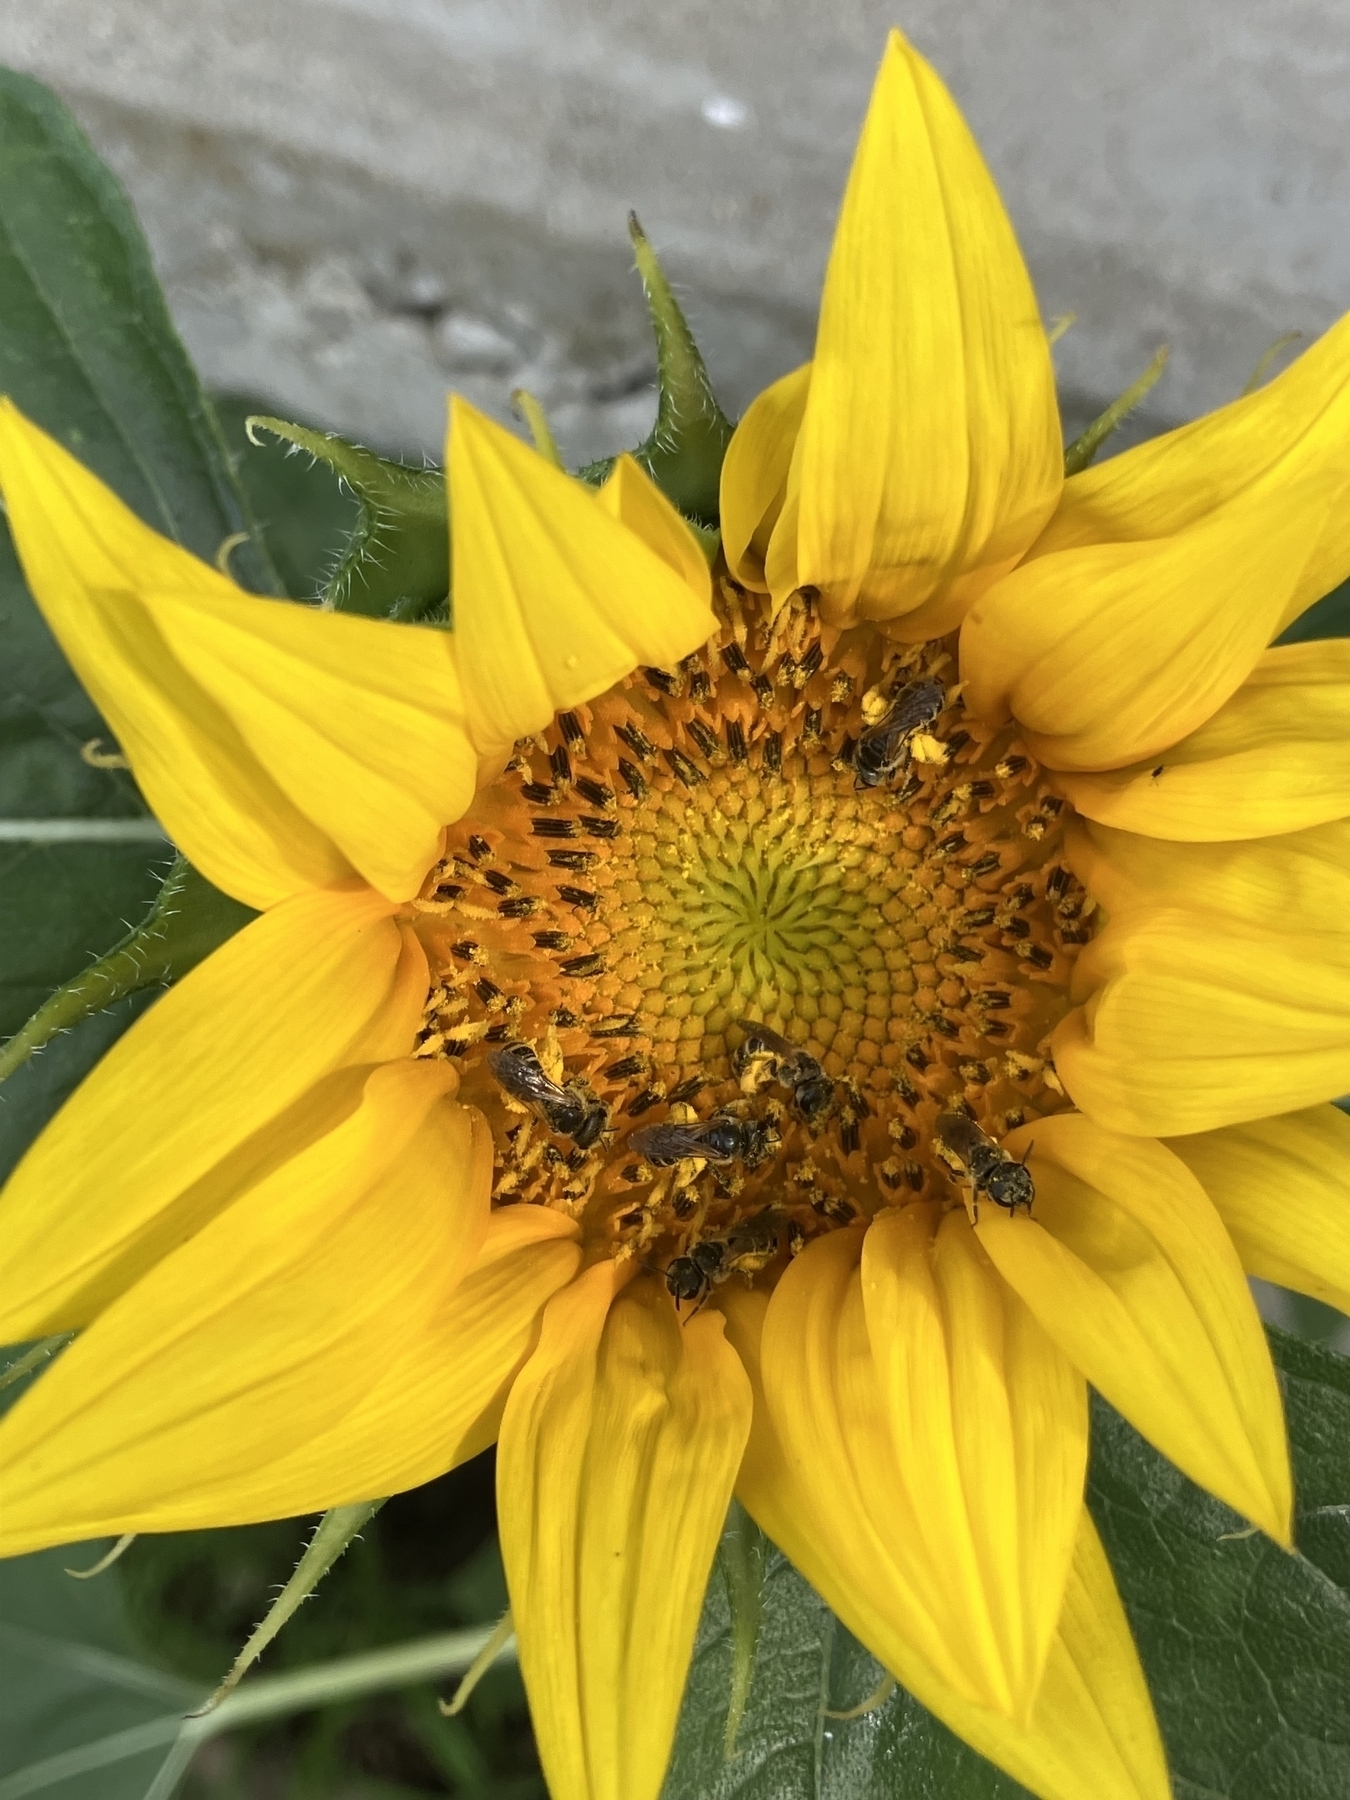 Sunflower with yellow petals and orange-yellow center with several small bees with pollen sacs filled with yellow pollen